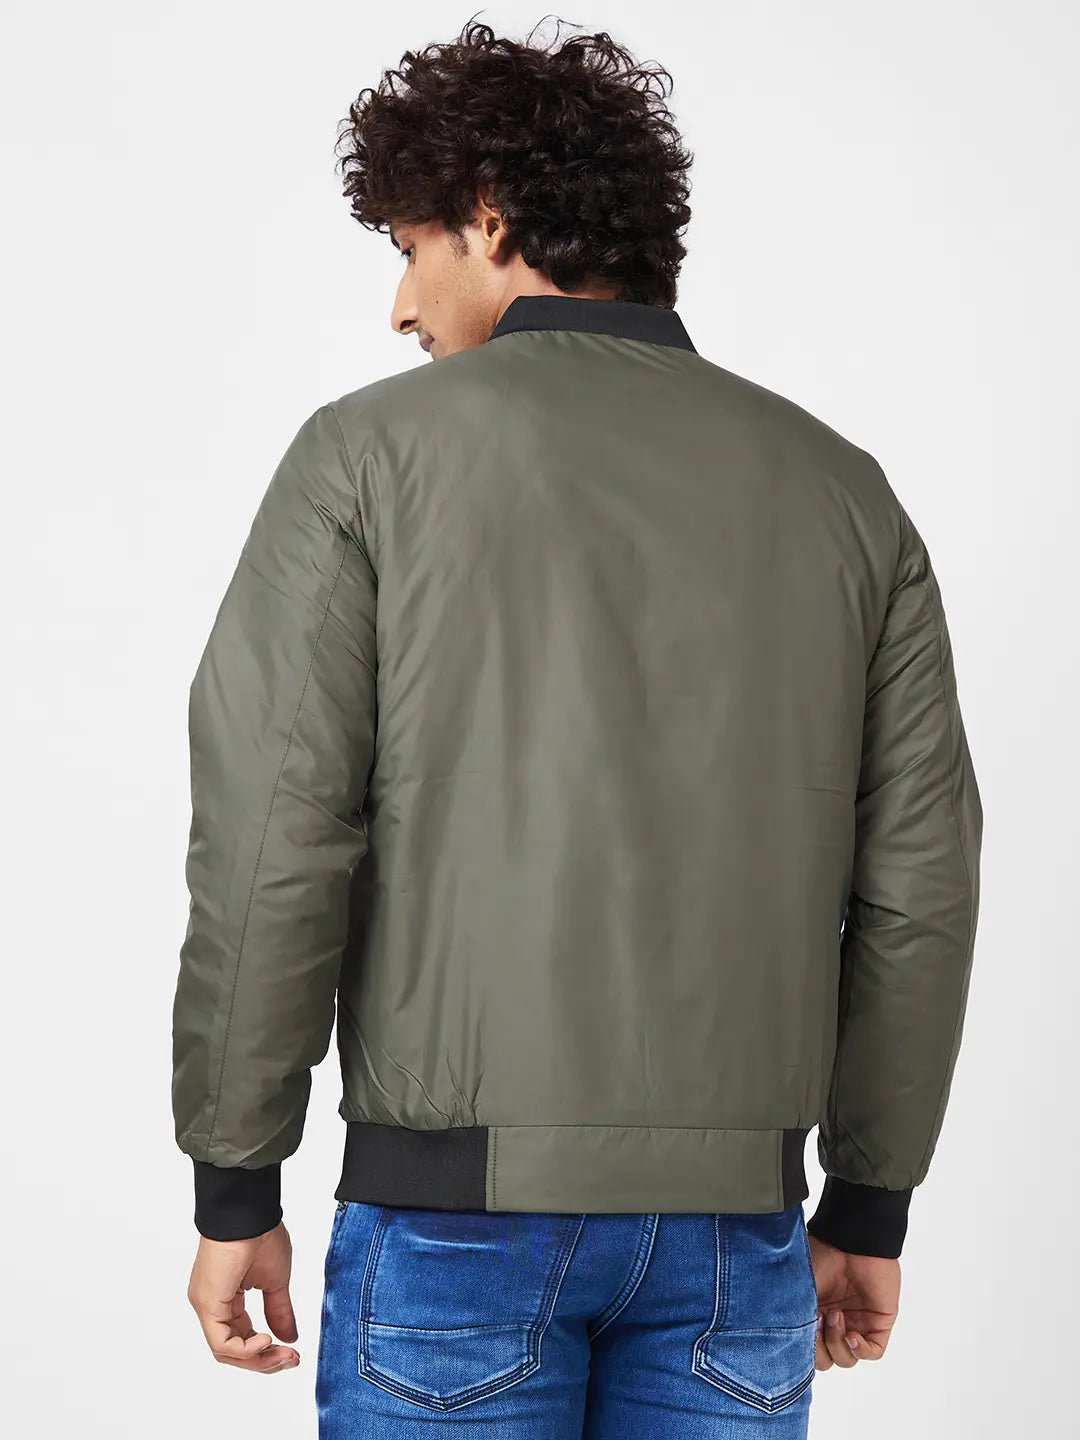 Buy Spykar Men Military Green Polyester Straight Fit Full Sleeve Plain  Lapel Casual Reversible Jacket at Amazon.in